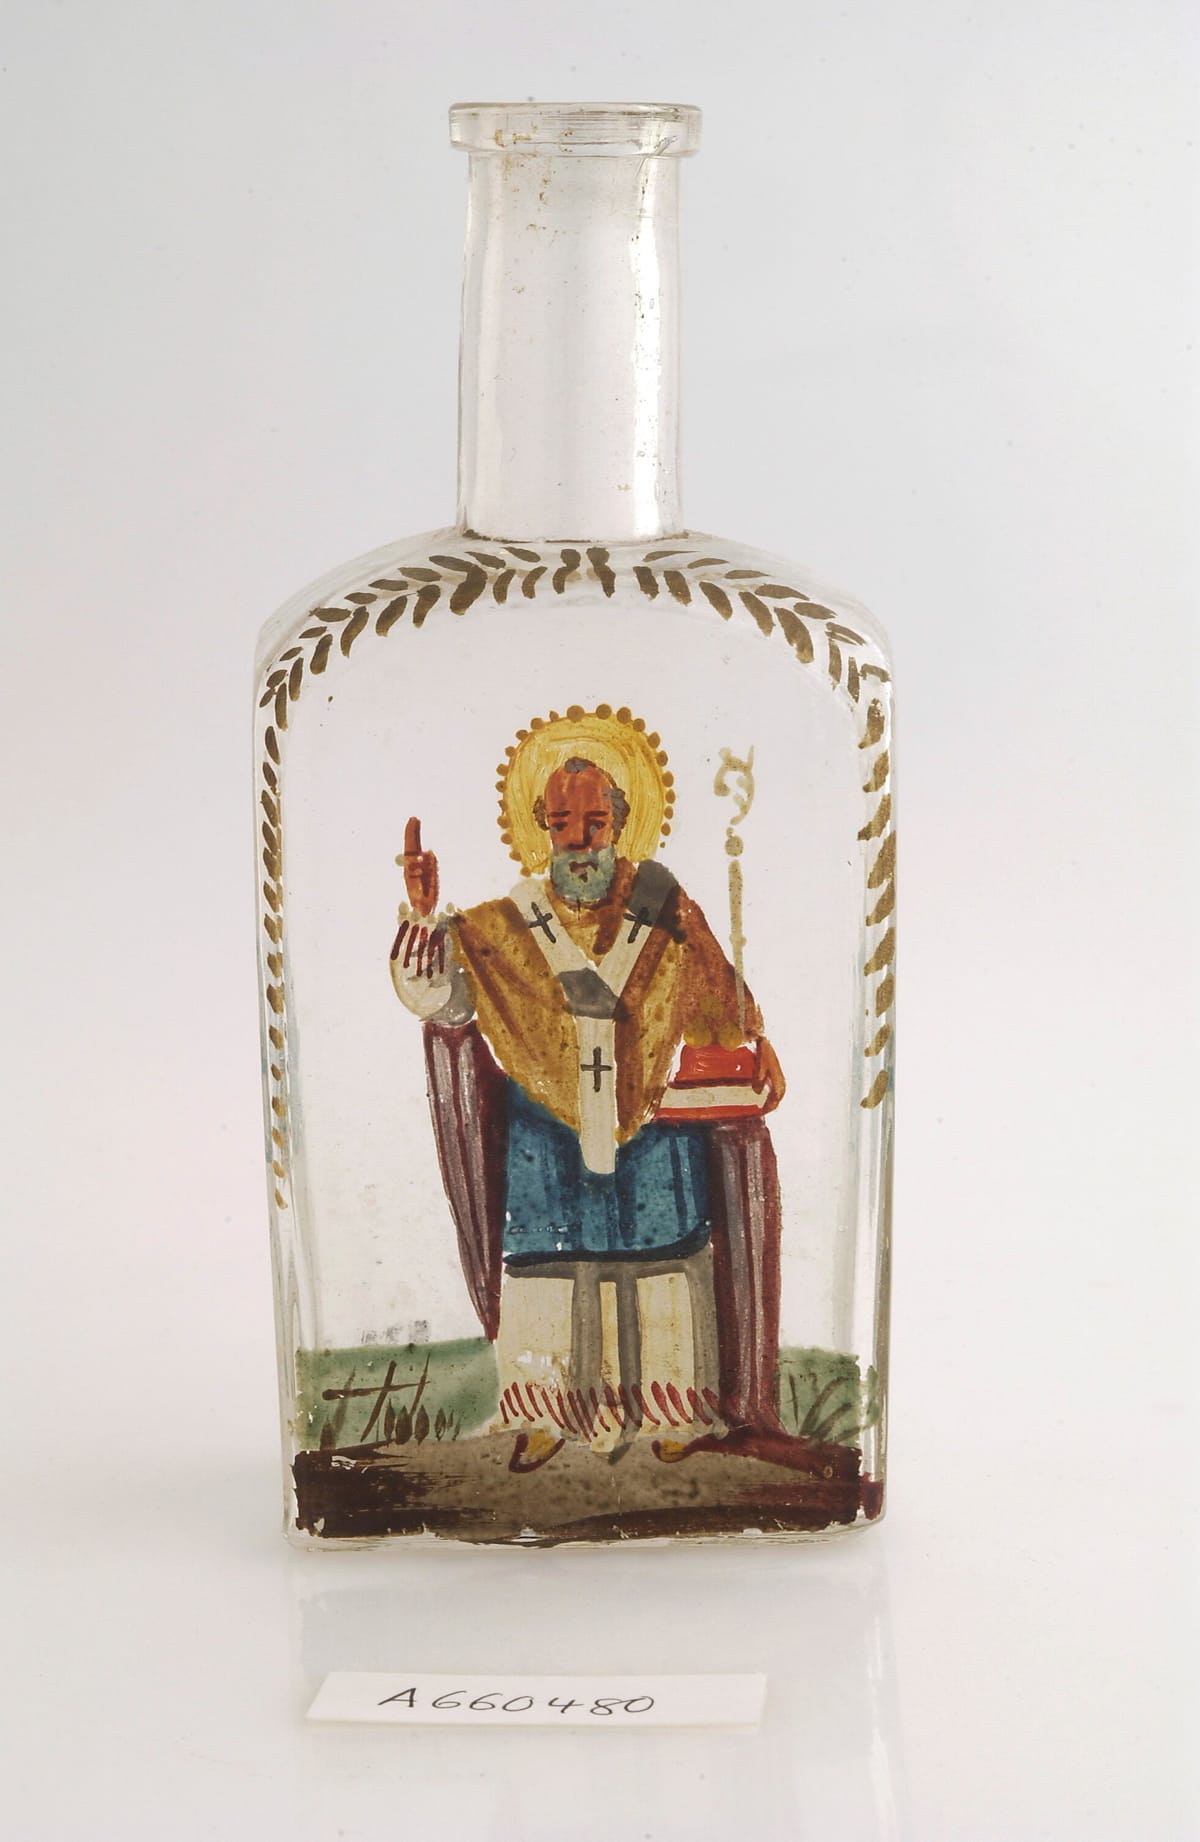 Bottle Decorated with the Picture of a saint, possible St Nicolas of Myrna (unknown date) - Catholic Stock Photo